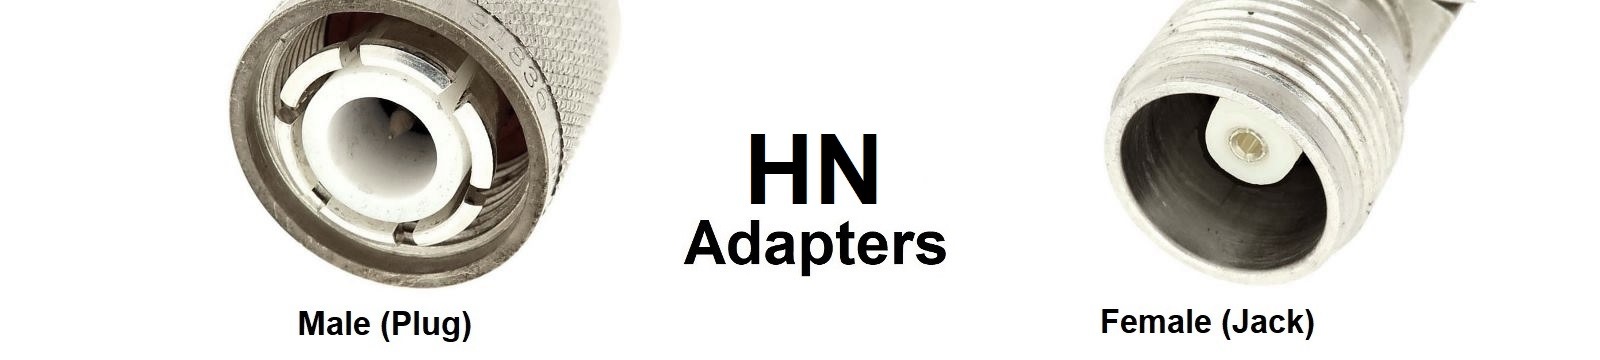 HN Adapters Category Banner - Max-Gain Systems, Inc.